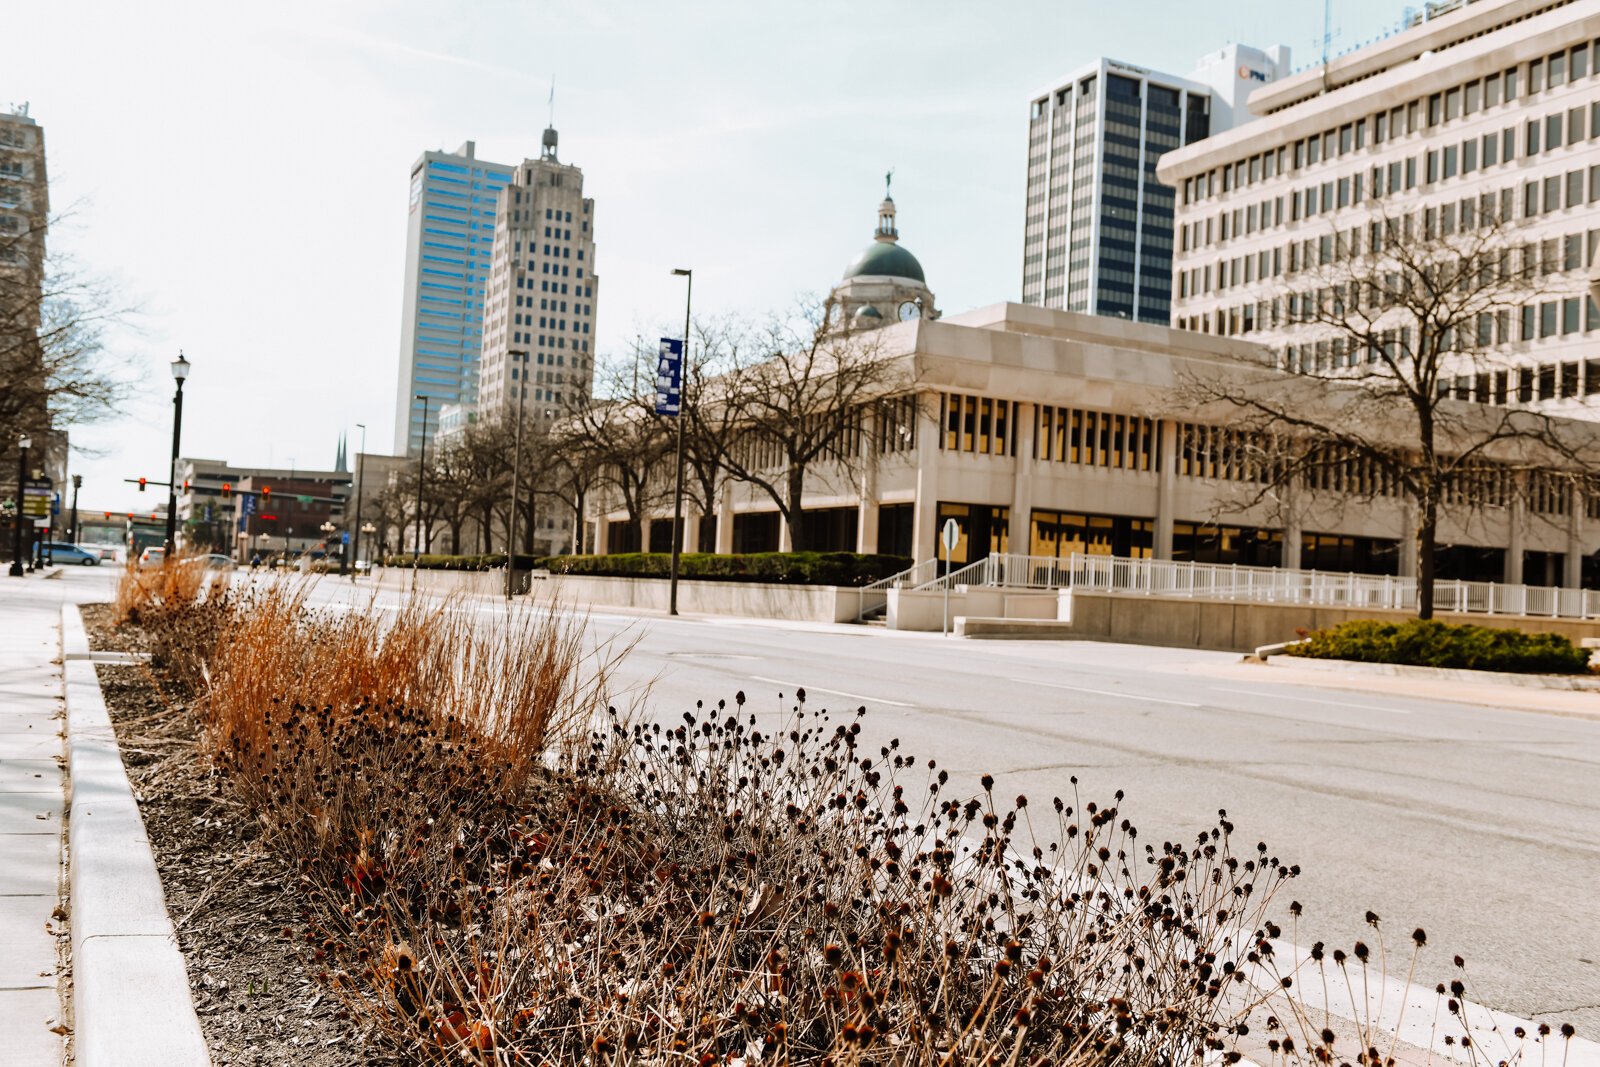 Fort Wayne has zoning requirements on new developments that require vegetated screening around surface parking lots and between properties with different zoning classifications.